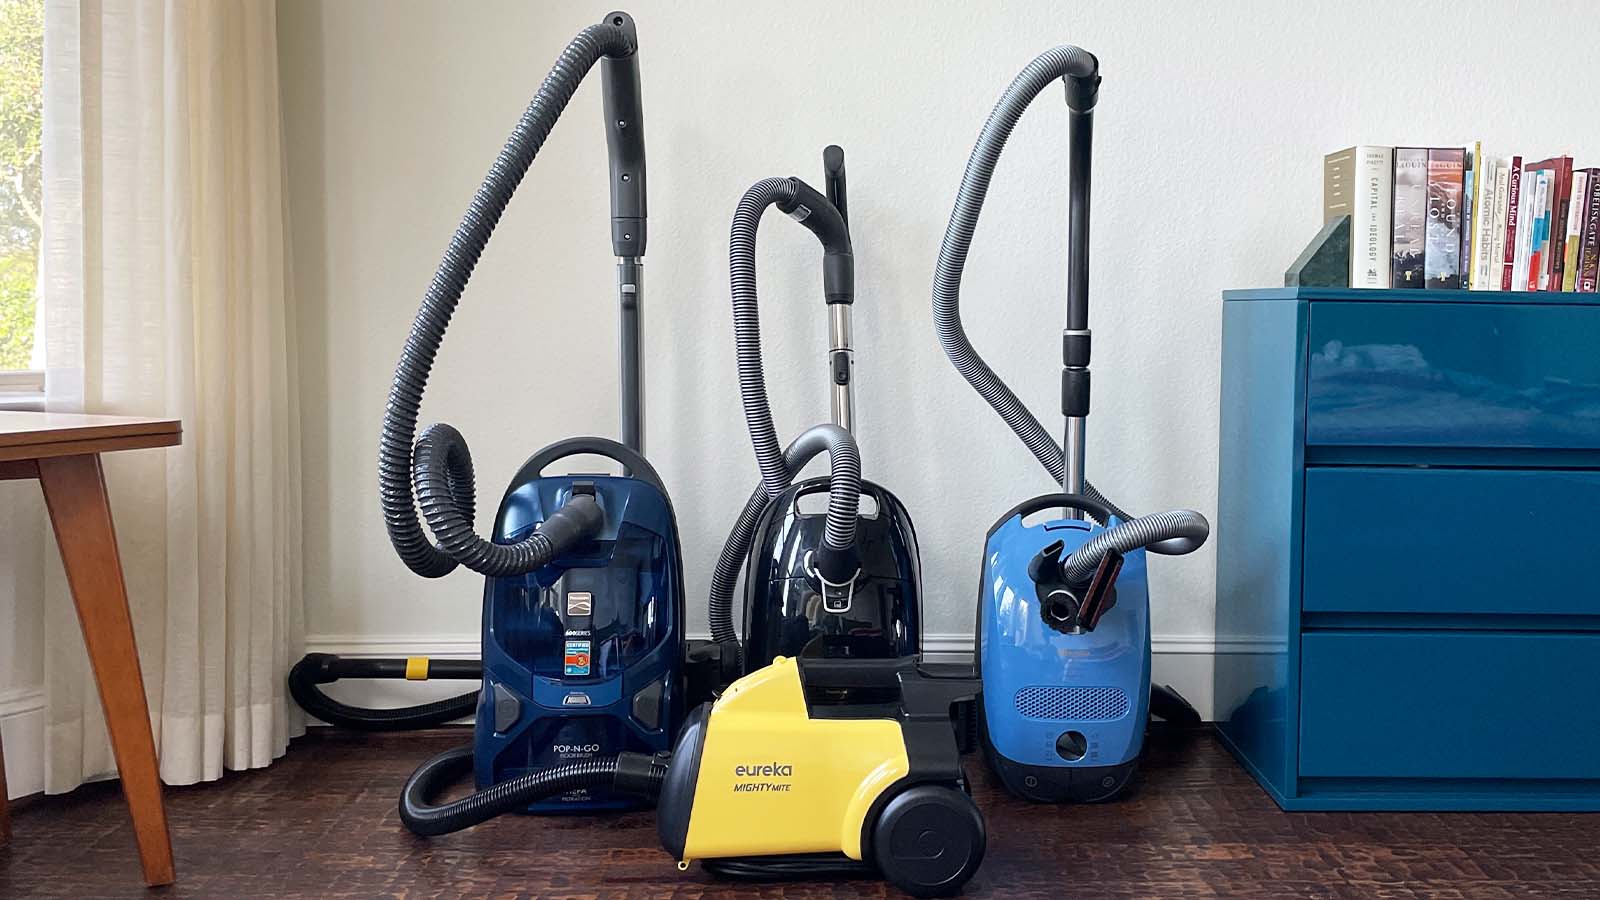 The Best Canister Vacuums In 2021 Cnn, Best Canister Vacuum For Hardwood Floors And Rugs